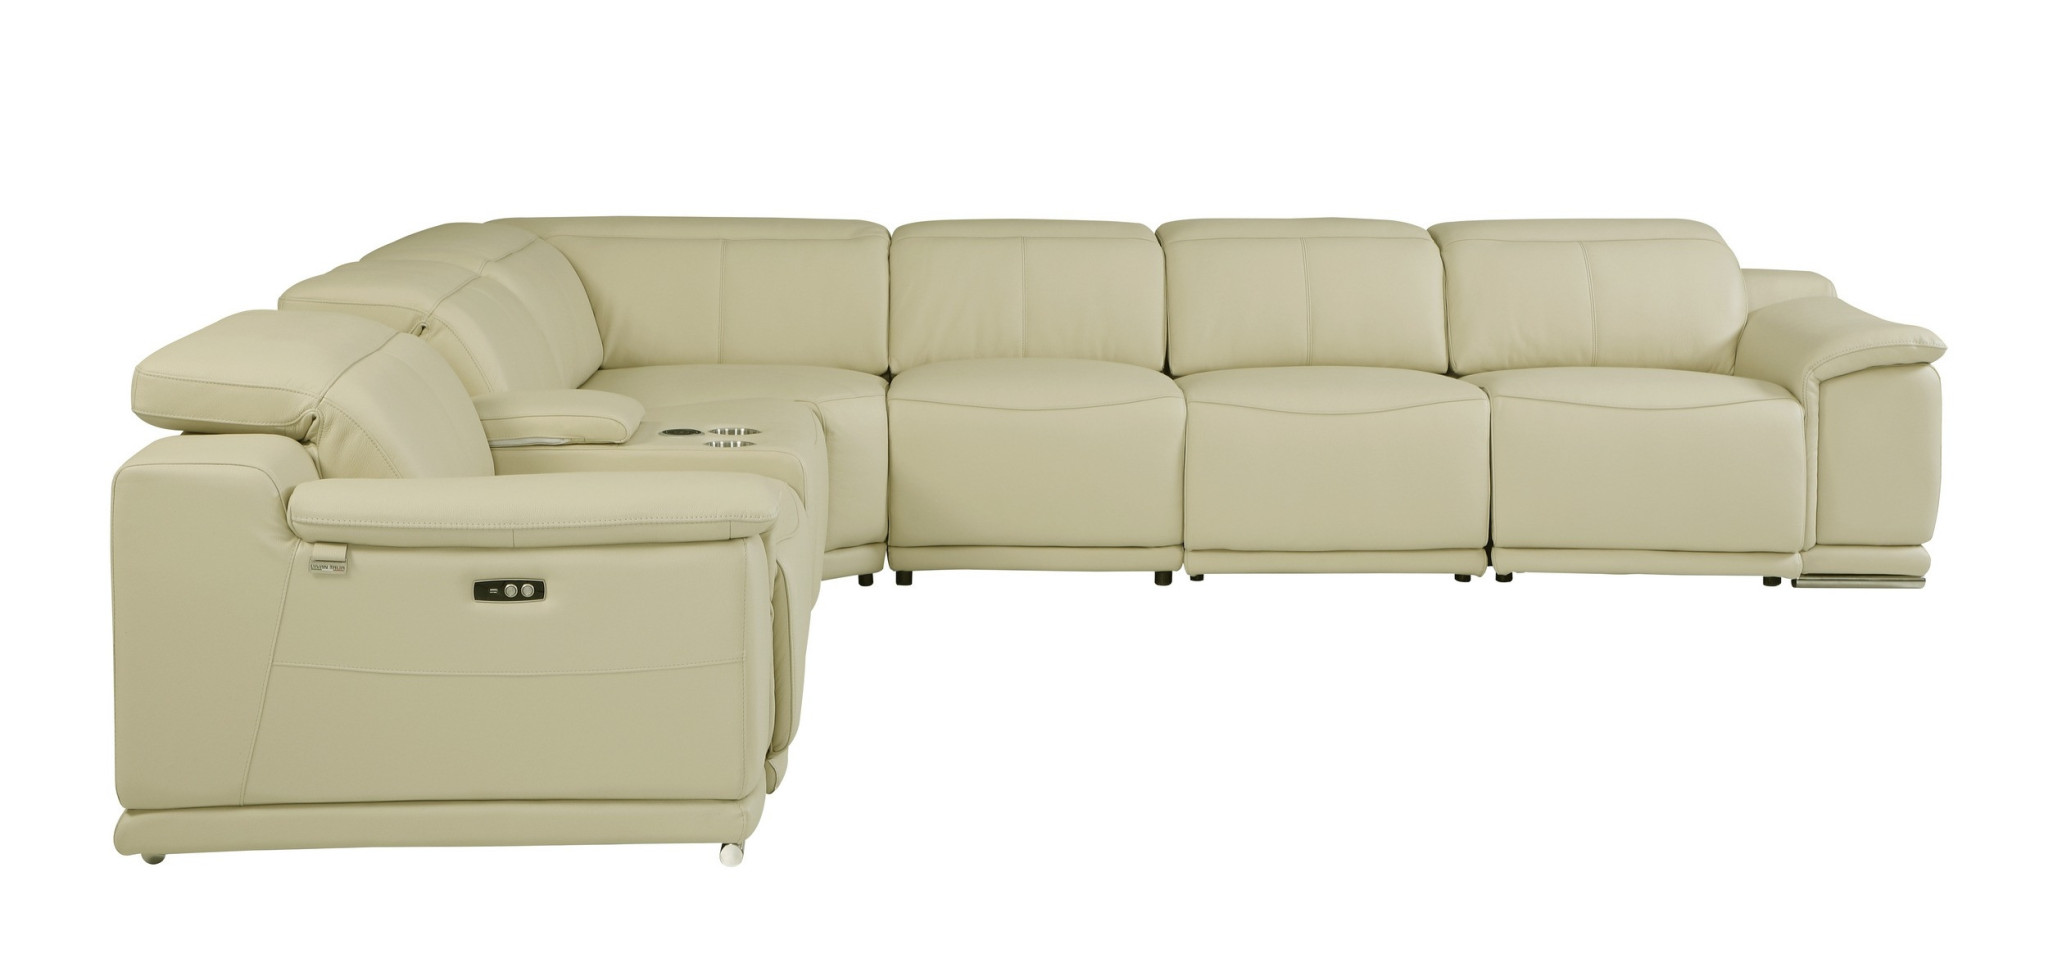 Beige Italian Leather Power Reclining U Shaped Seven Piece Corner Sectional With Console-476593-1